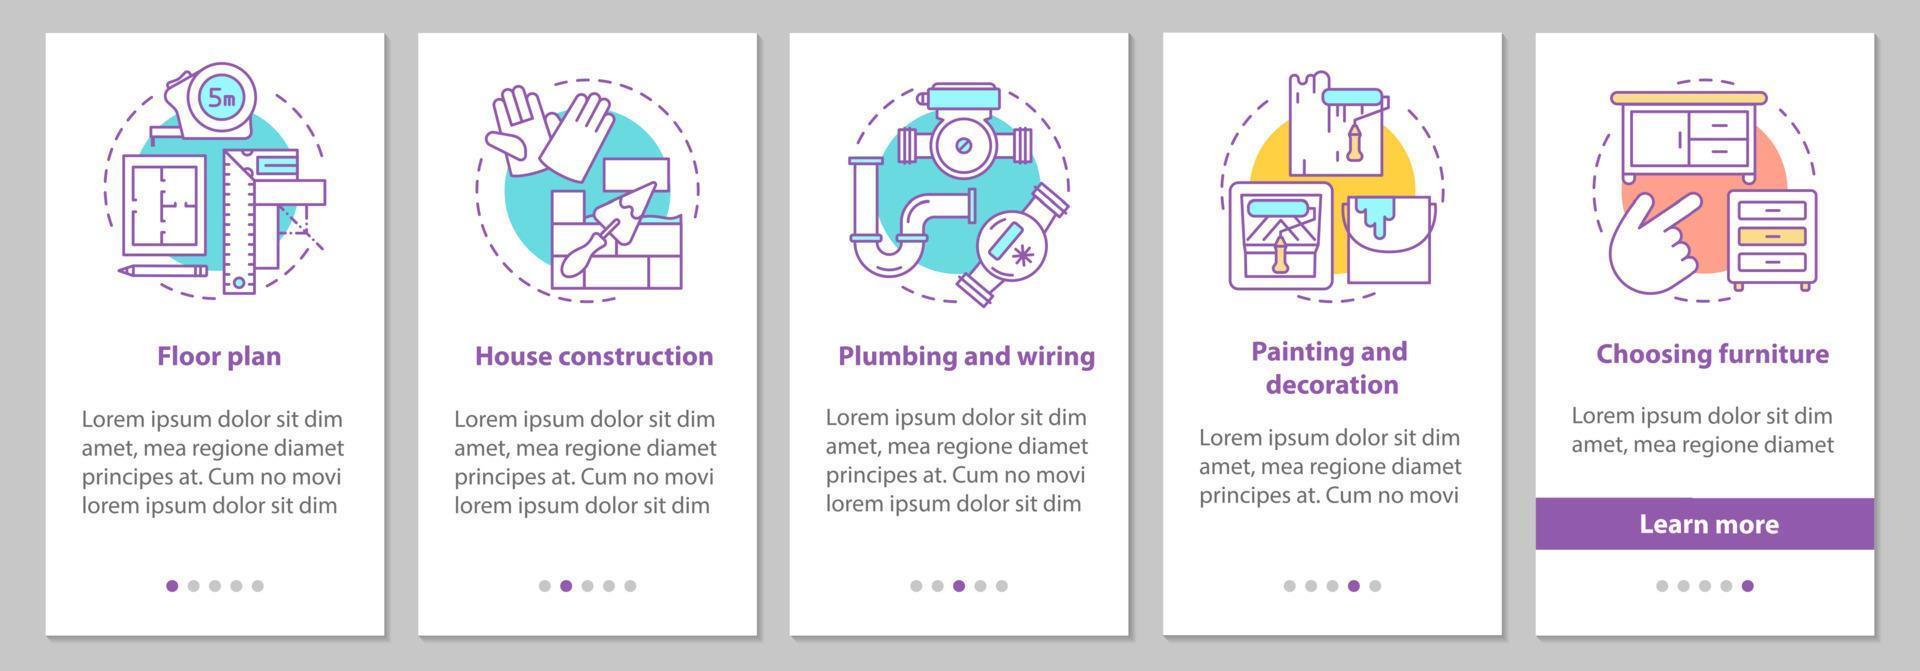 House building onboarding mobile app page screen with concepts. Floor plan, construction, wiring and plumbing, furniture steps graphic instructions. UX, UI, GUI vector template with illustrations